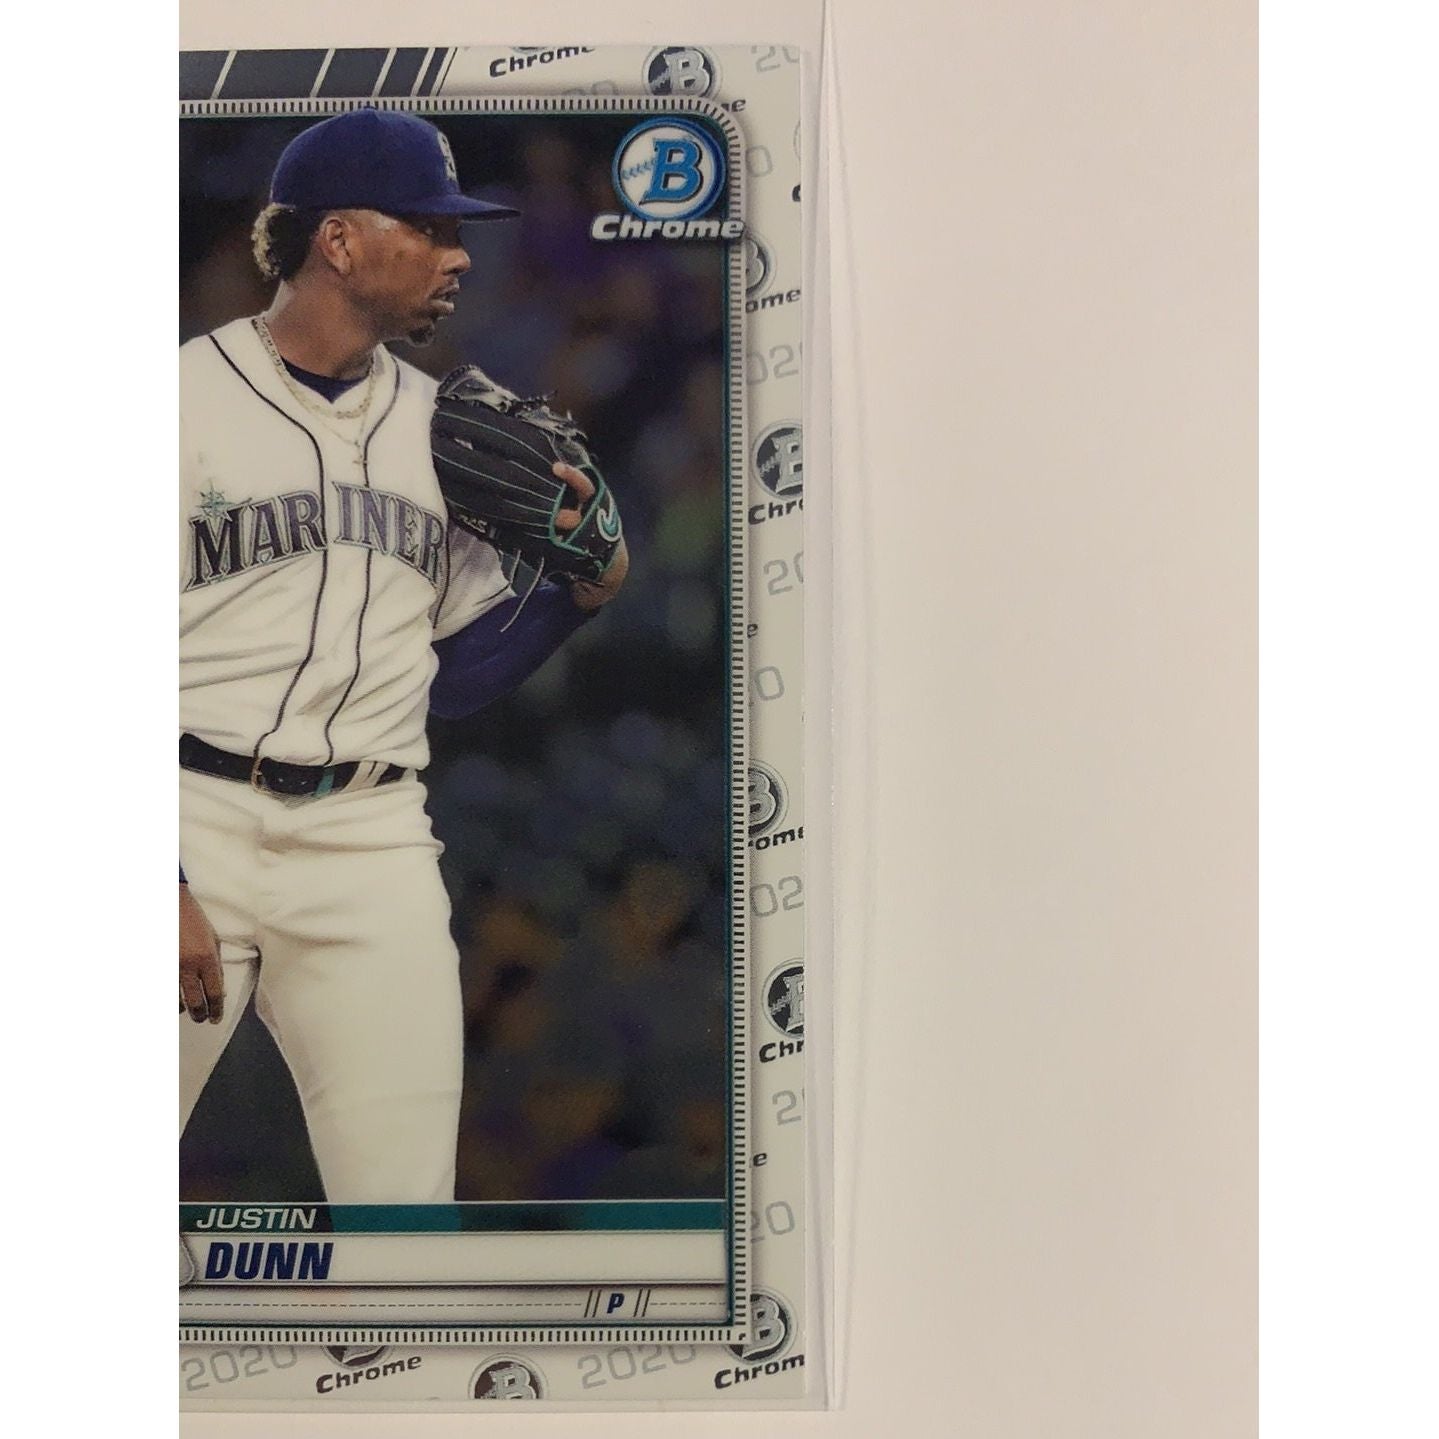  2020 Bowman Chrome Justin Dunn RC  Local Legends Cards & Collectibles